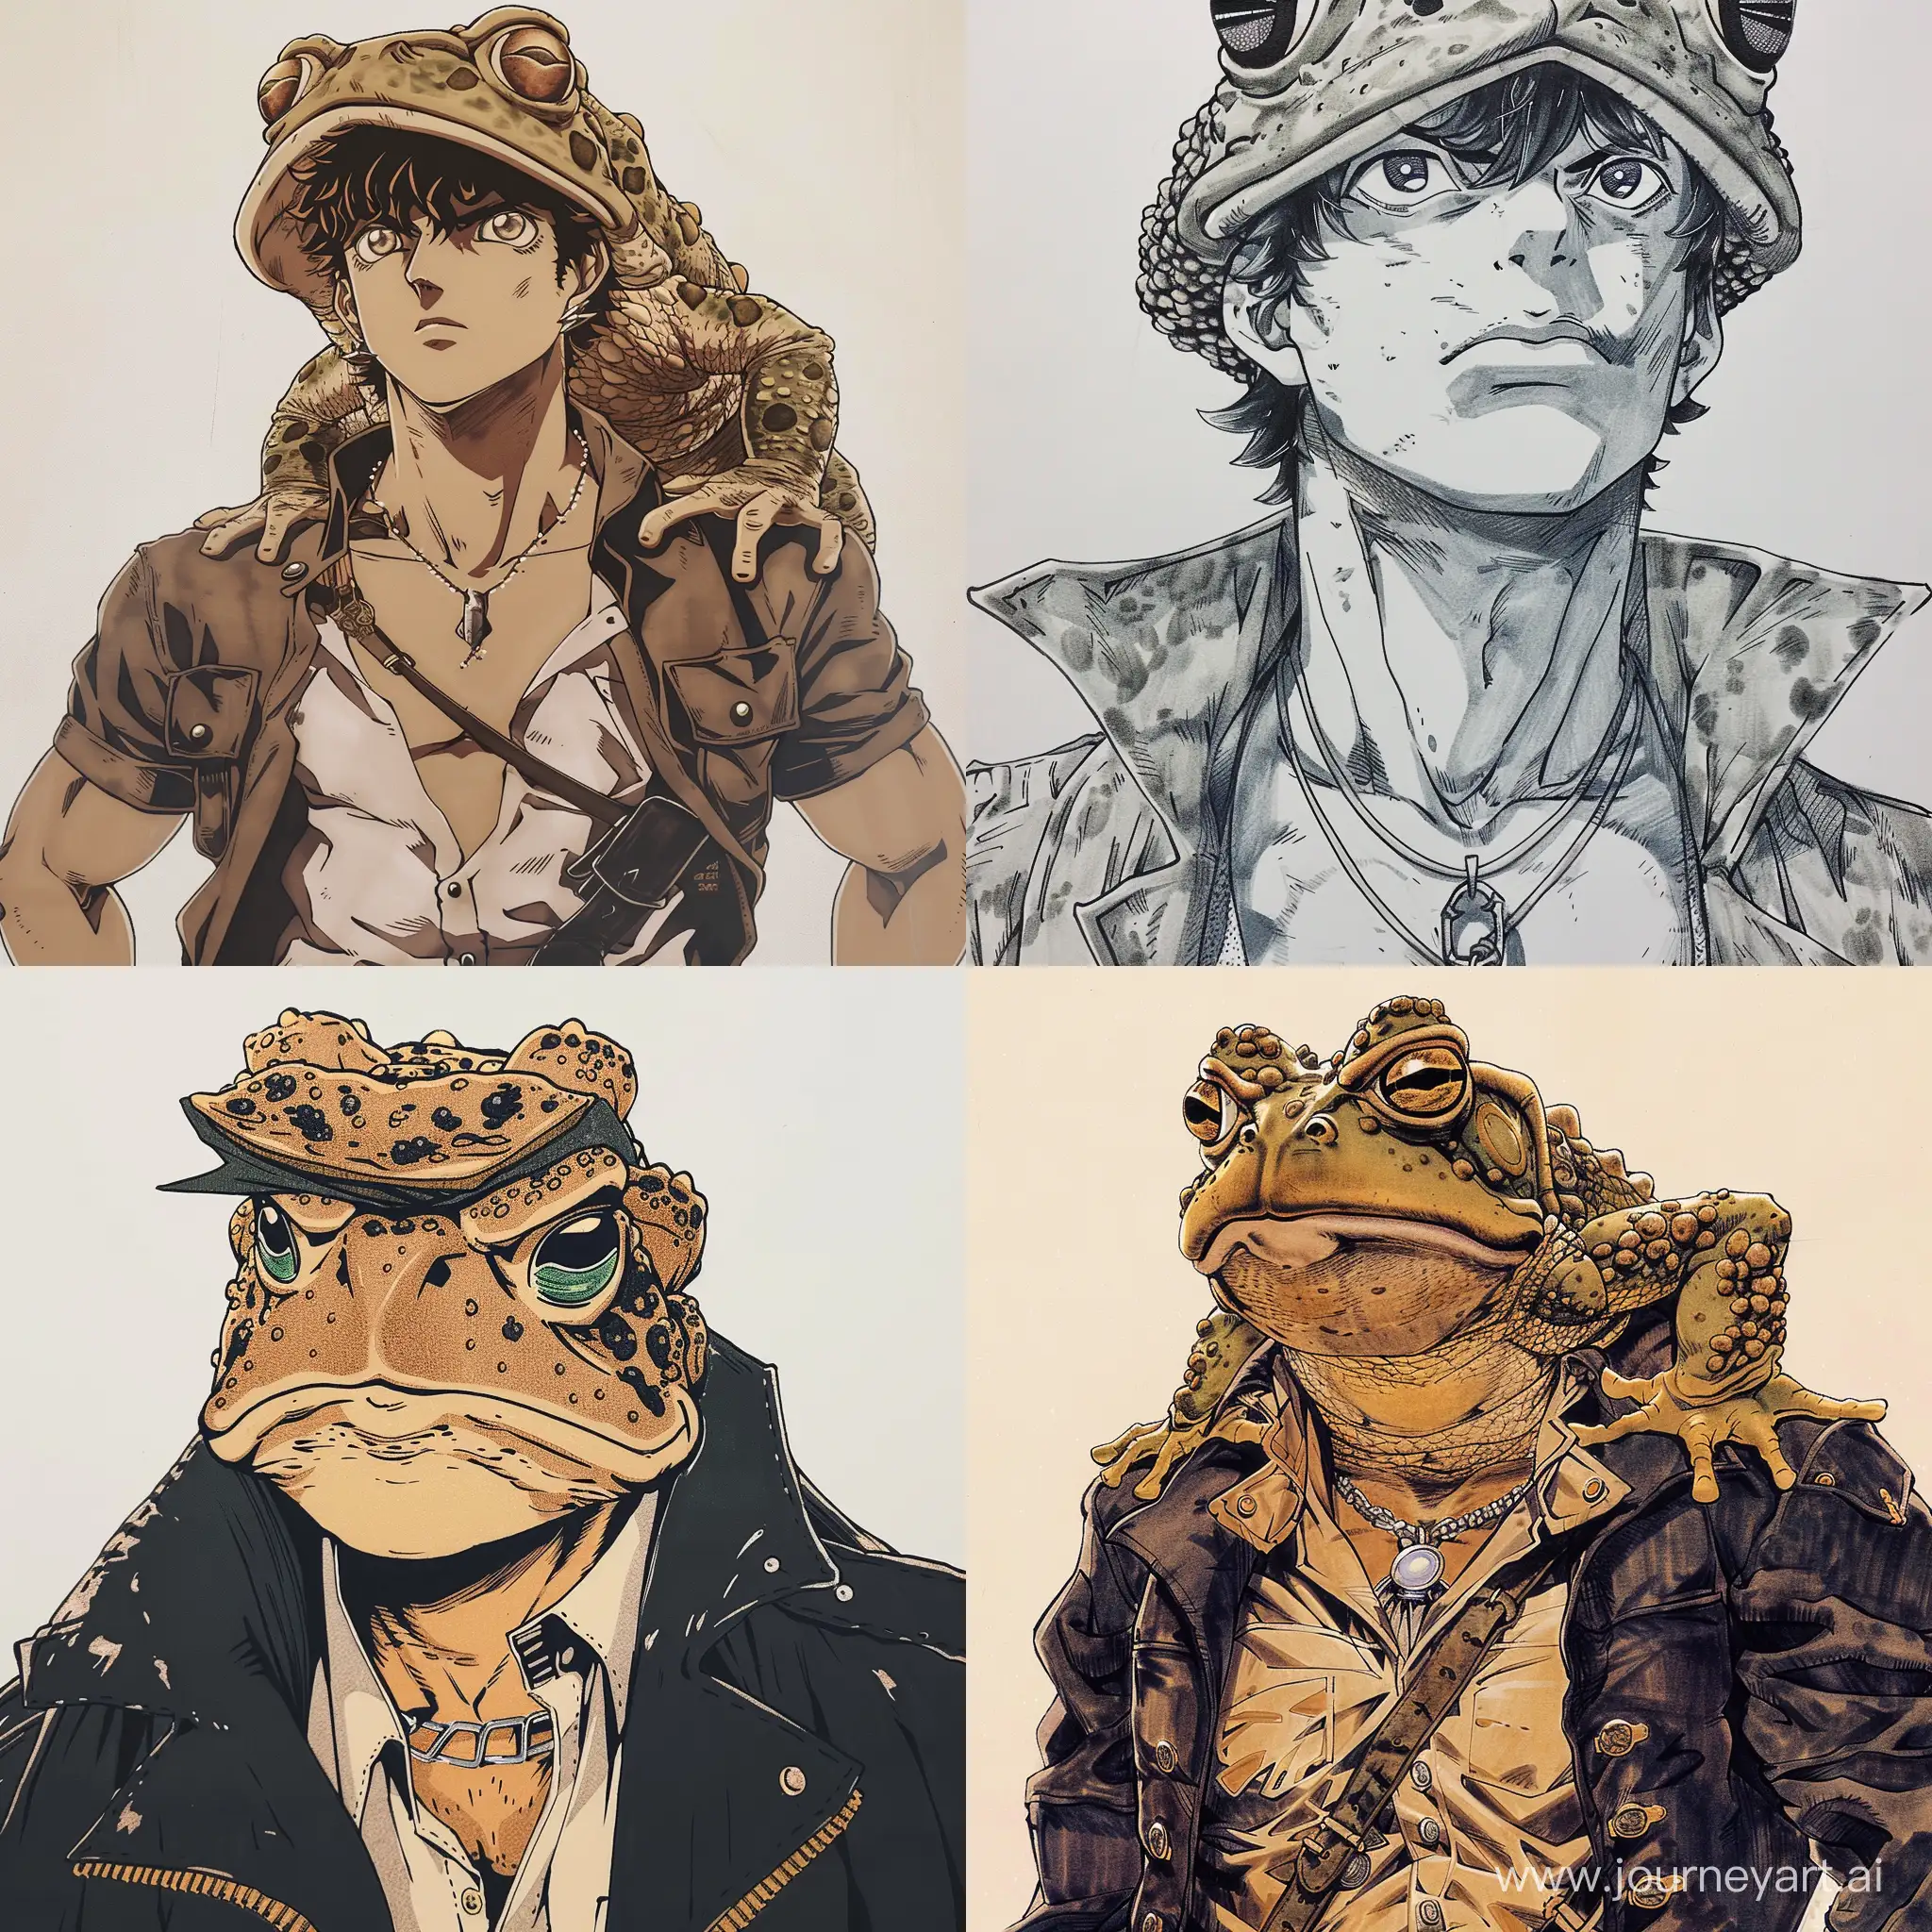 draw the hero of the anime Jojo - Jotaro - in the form of a toad, so that the toad's face can be seen , he should look like a toad with a human build and in the same clothes as the main character . The drawing should be like in the anime Jojo